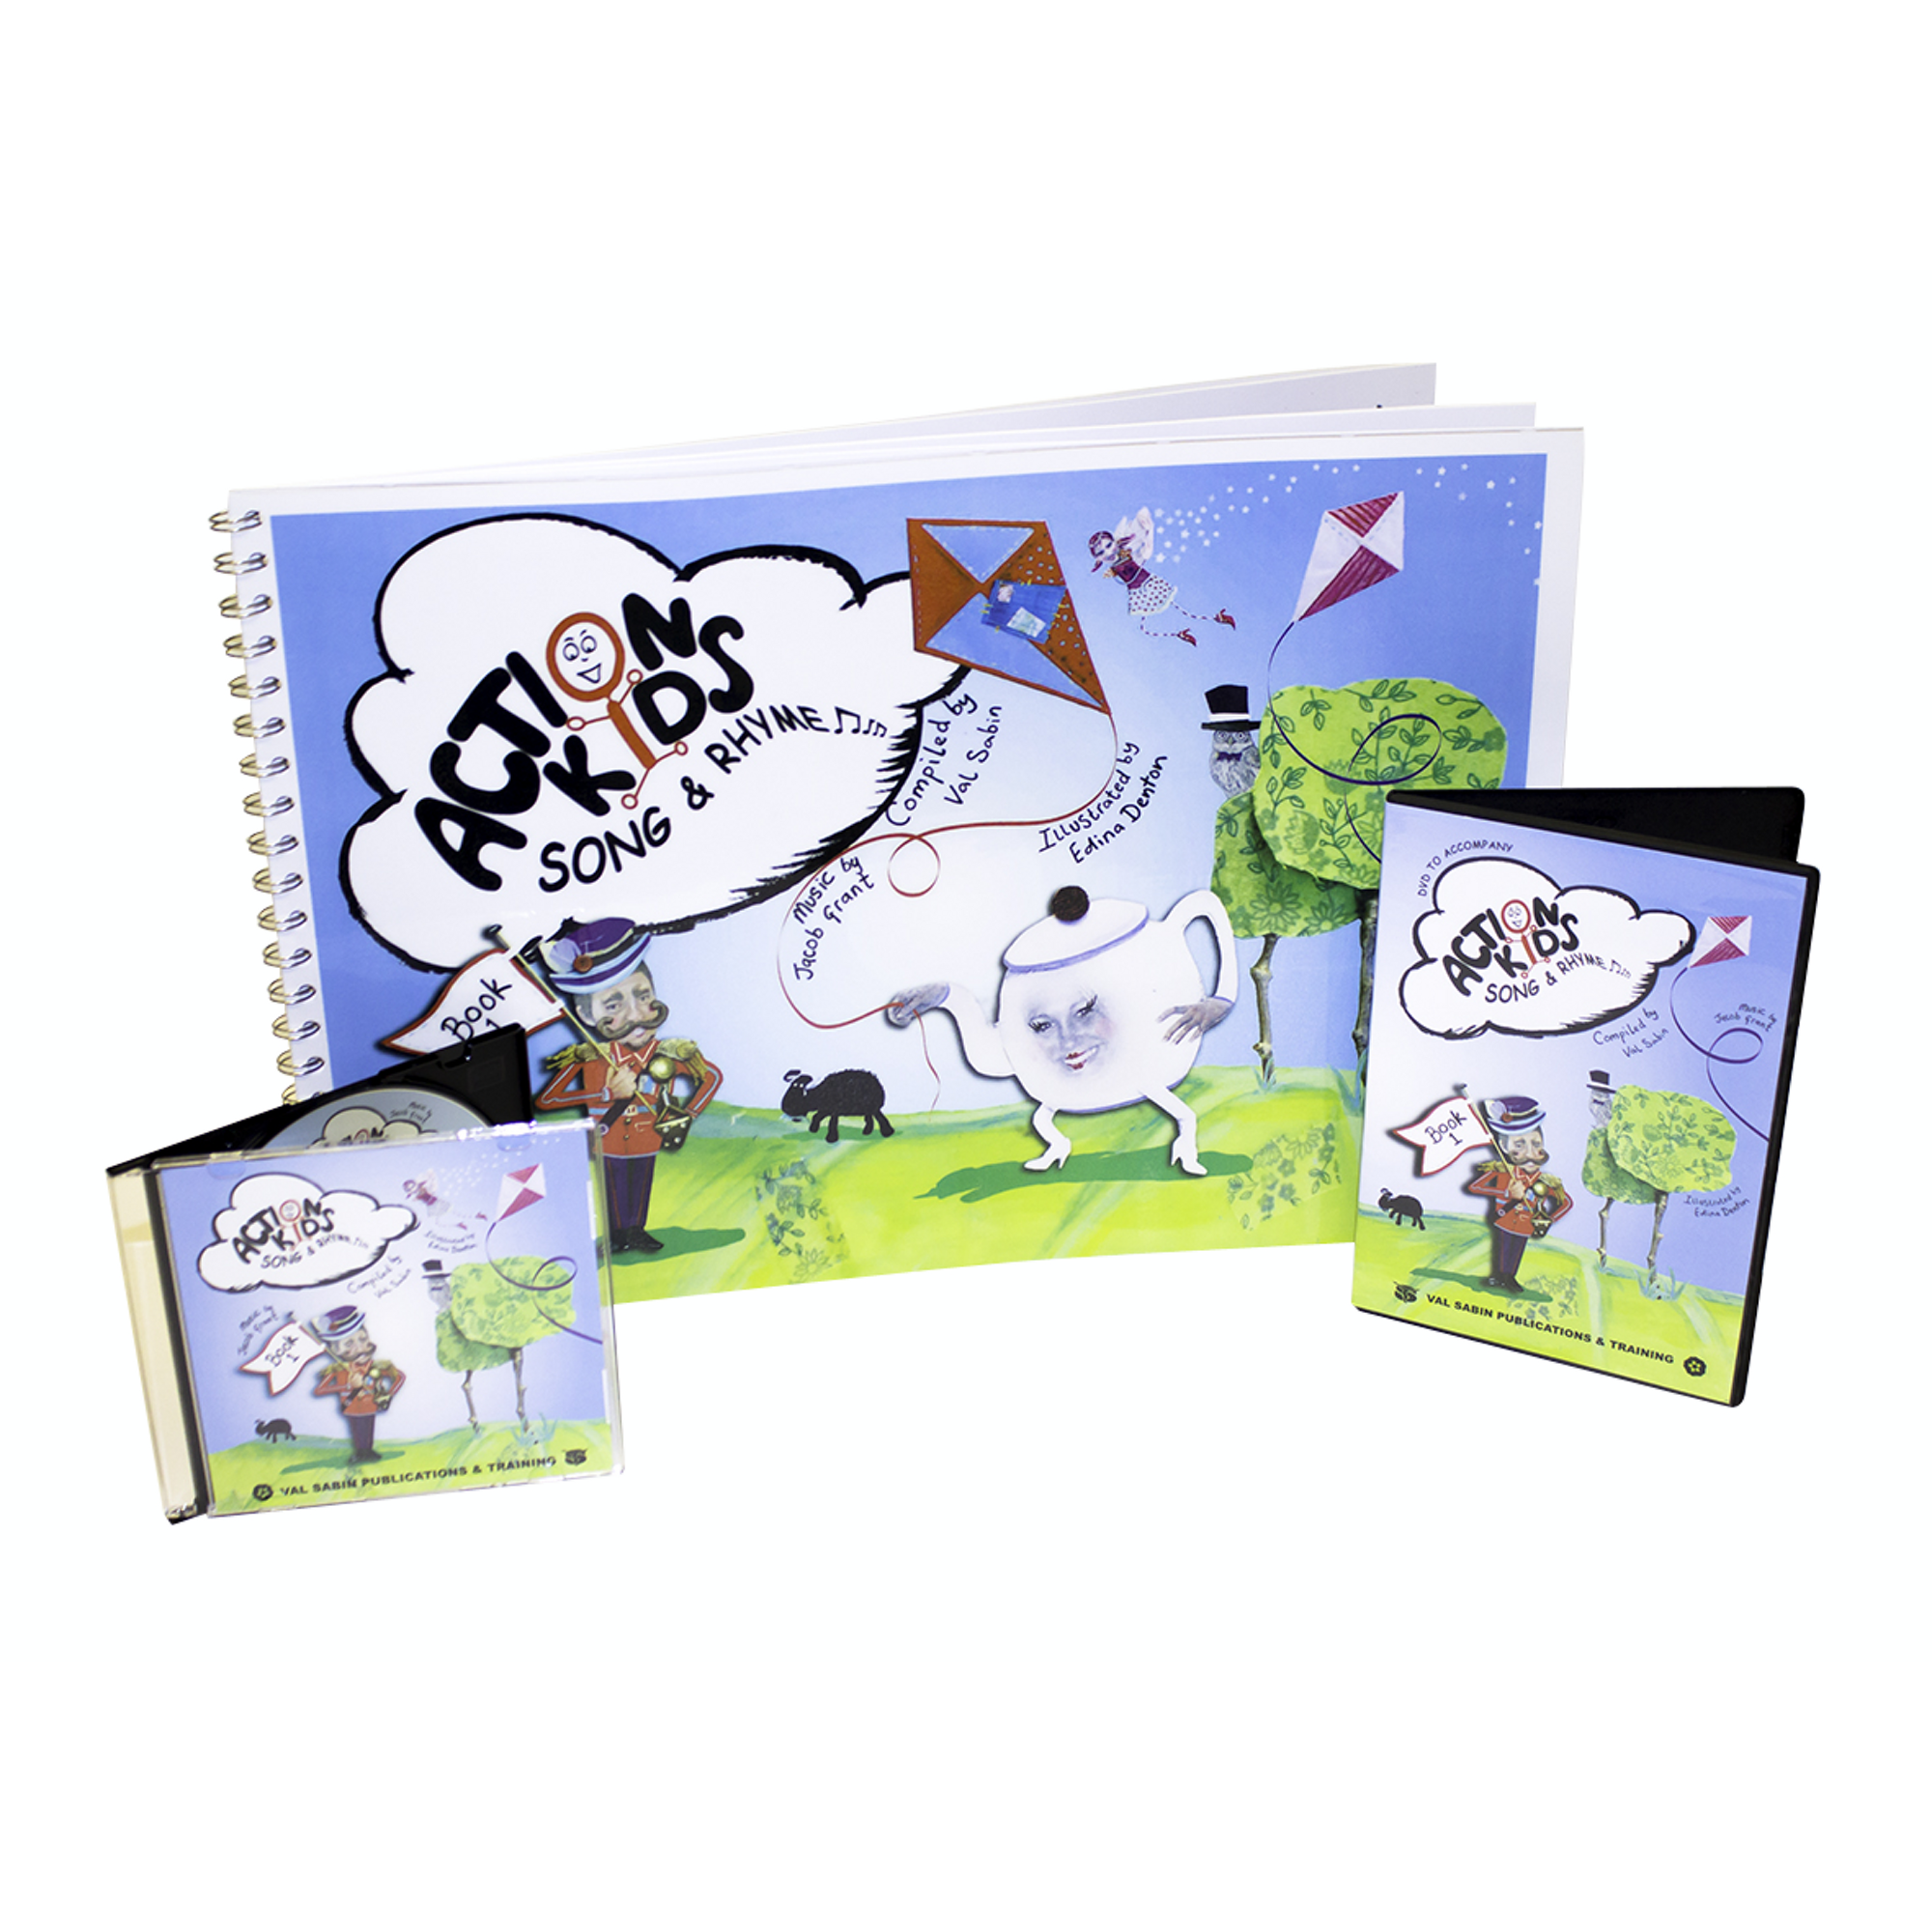 Action Kids Song Rhyme Book 1 CD And Dvd